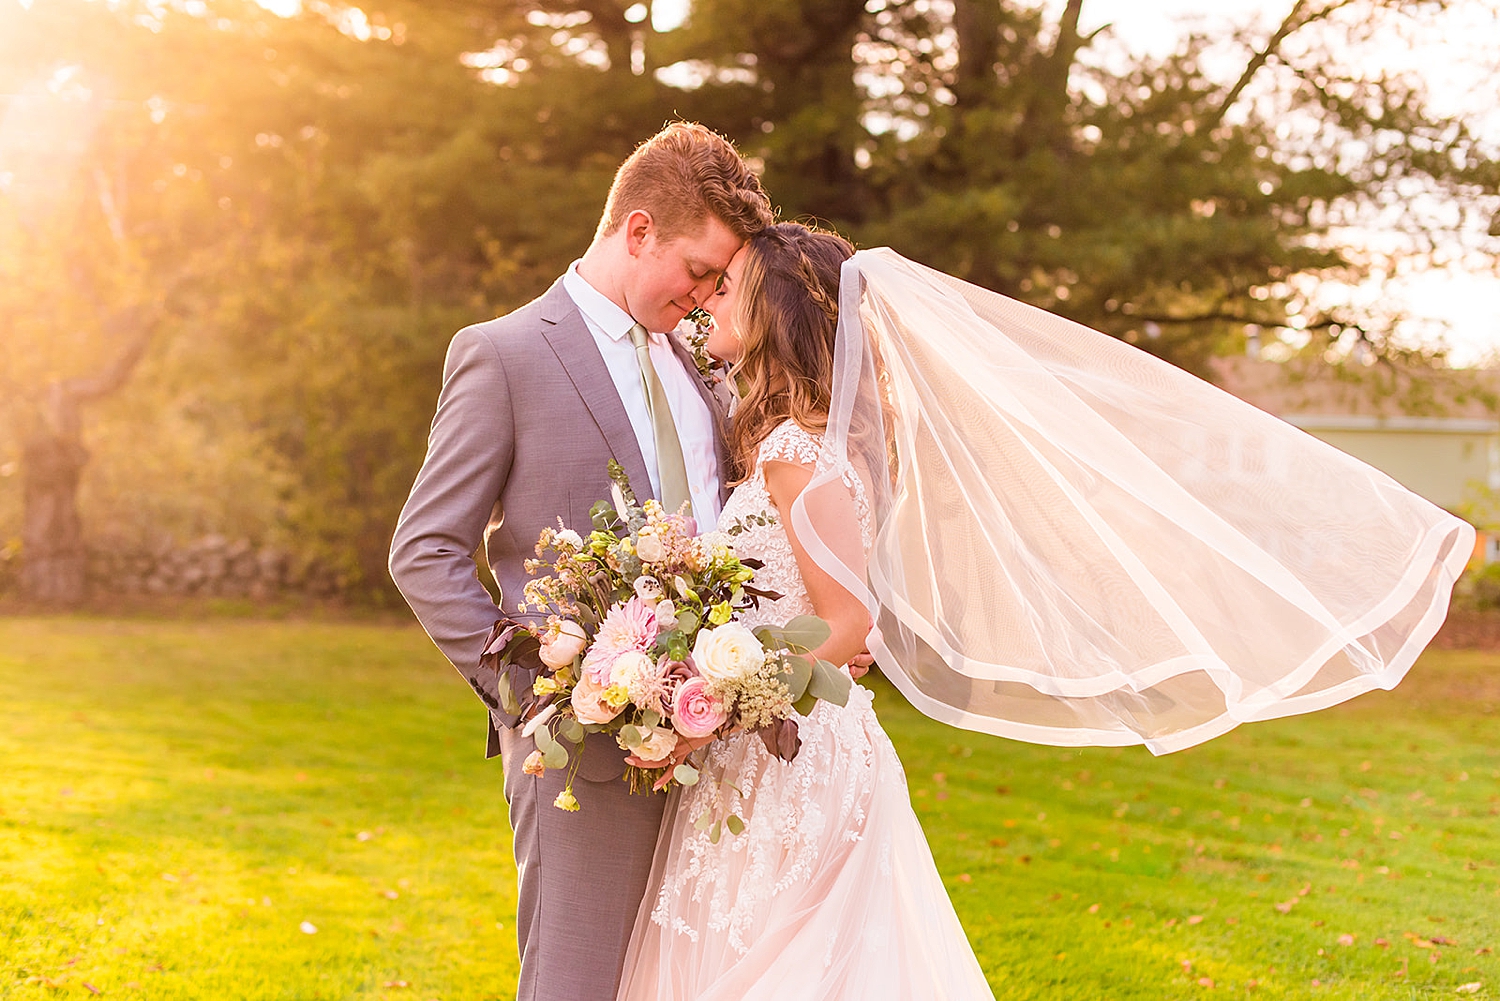 NH wedding photographer captures newlyweds kissing in the golden light